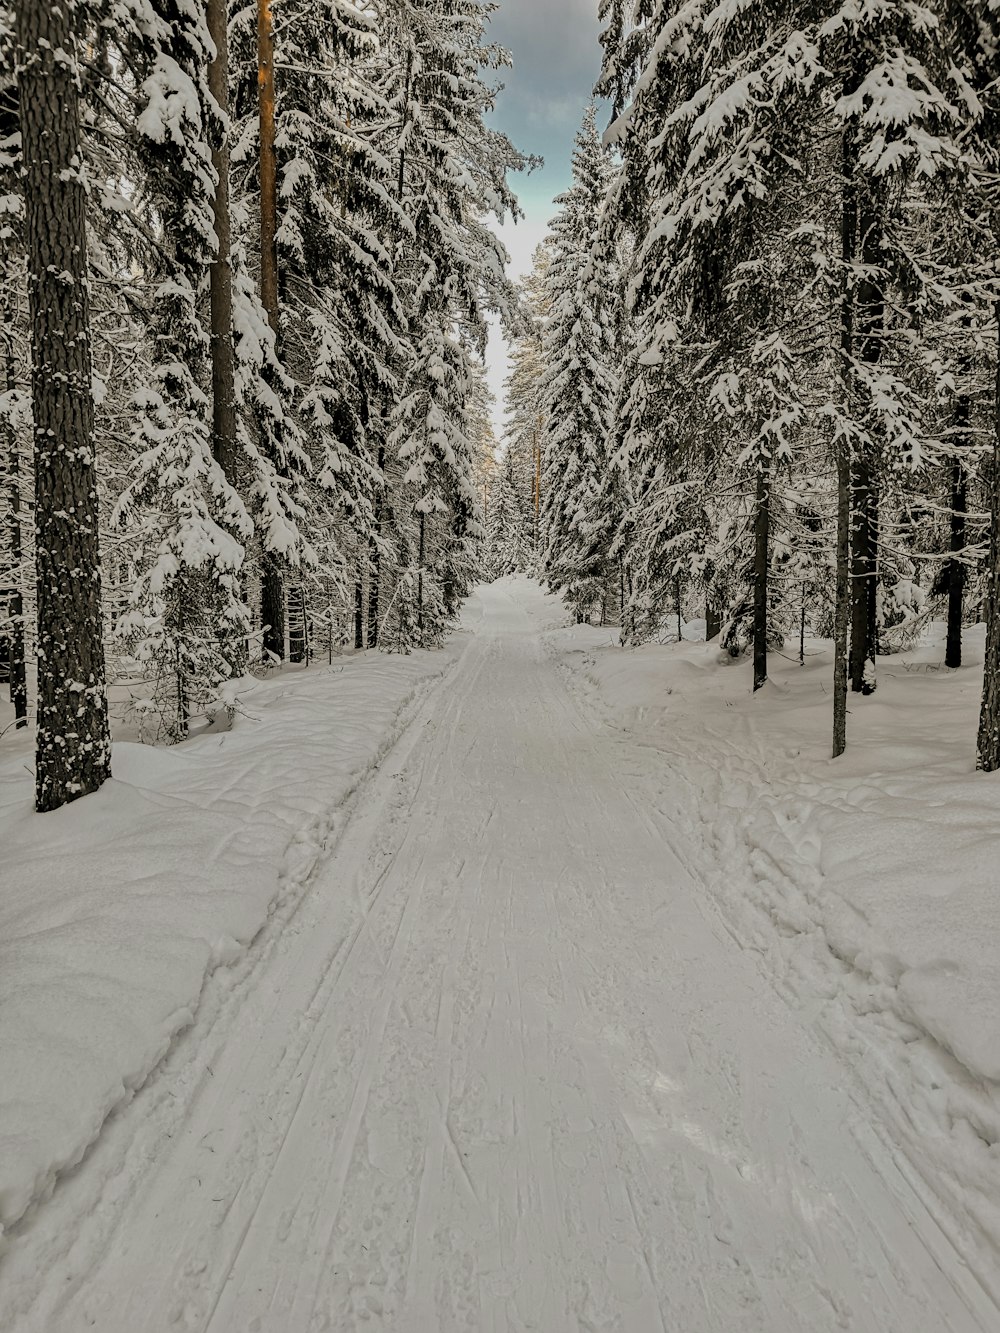 snow-covered road between pine trees during daytime